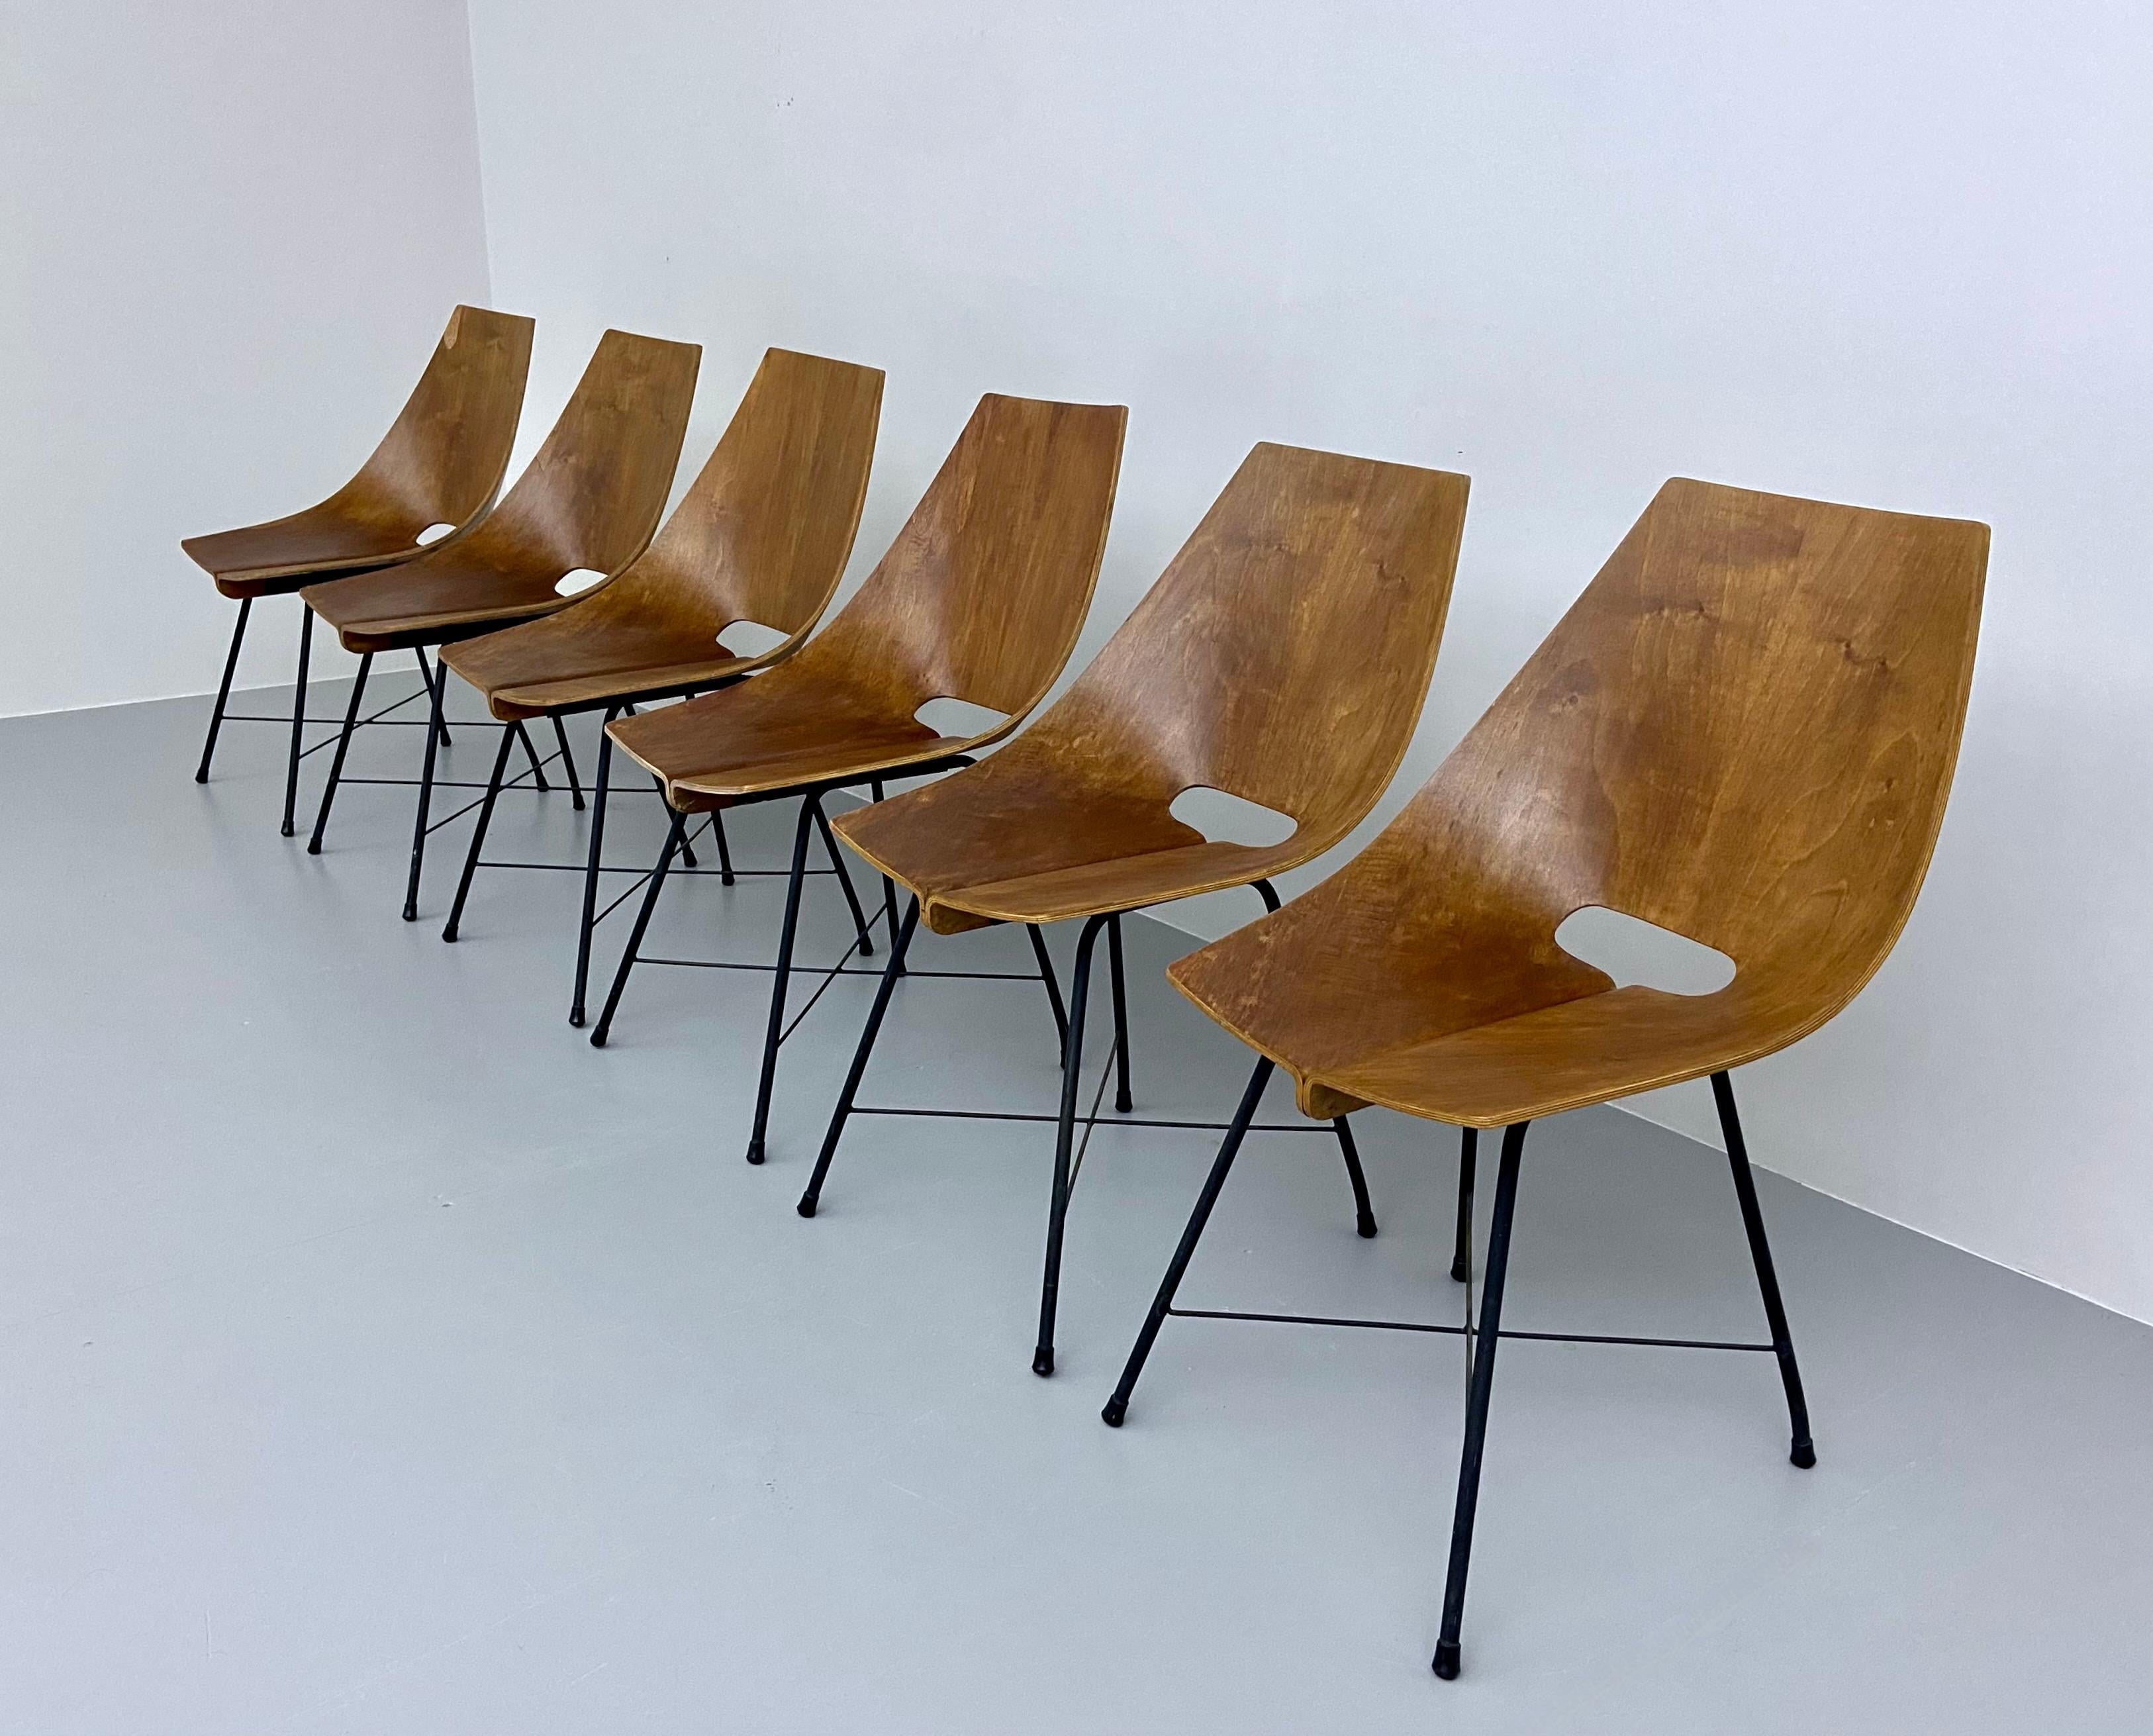 Italian Set of 6 Dining Room Chairs by Carlo Ratti in Bended Wood and Metal, Italy, 1954